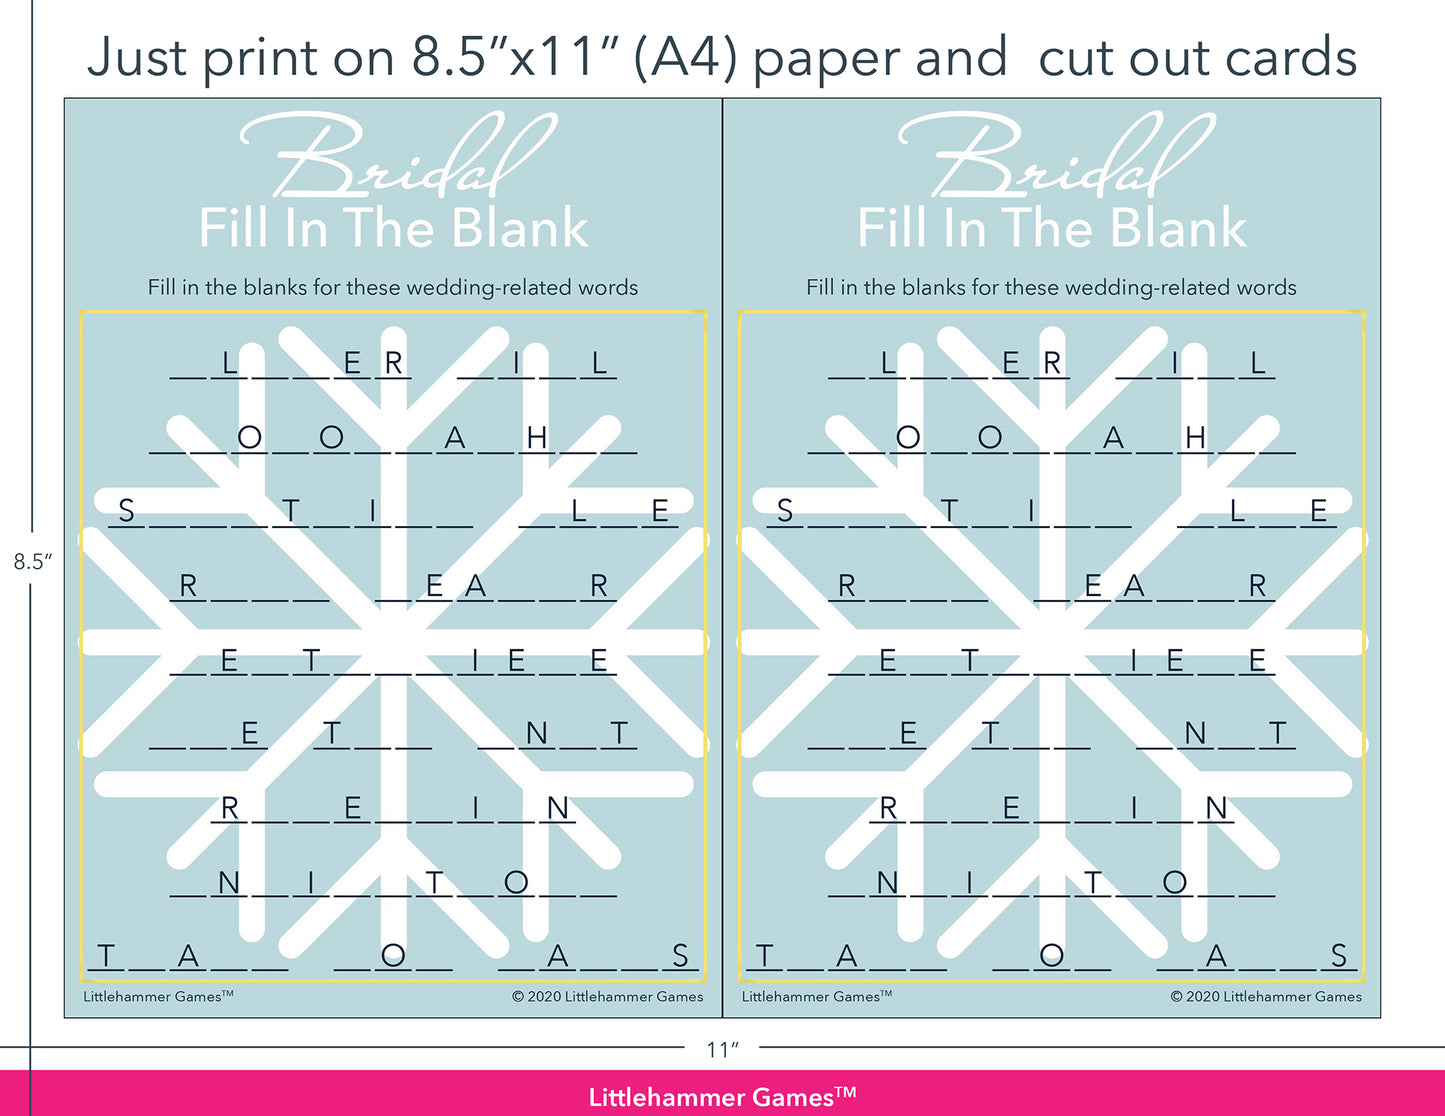 Bridal Fill in the Blank snowflake game cards with printing instructions